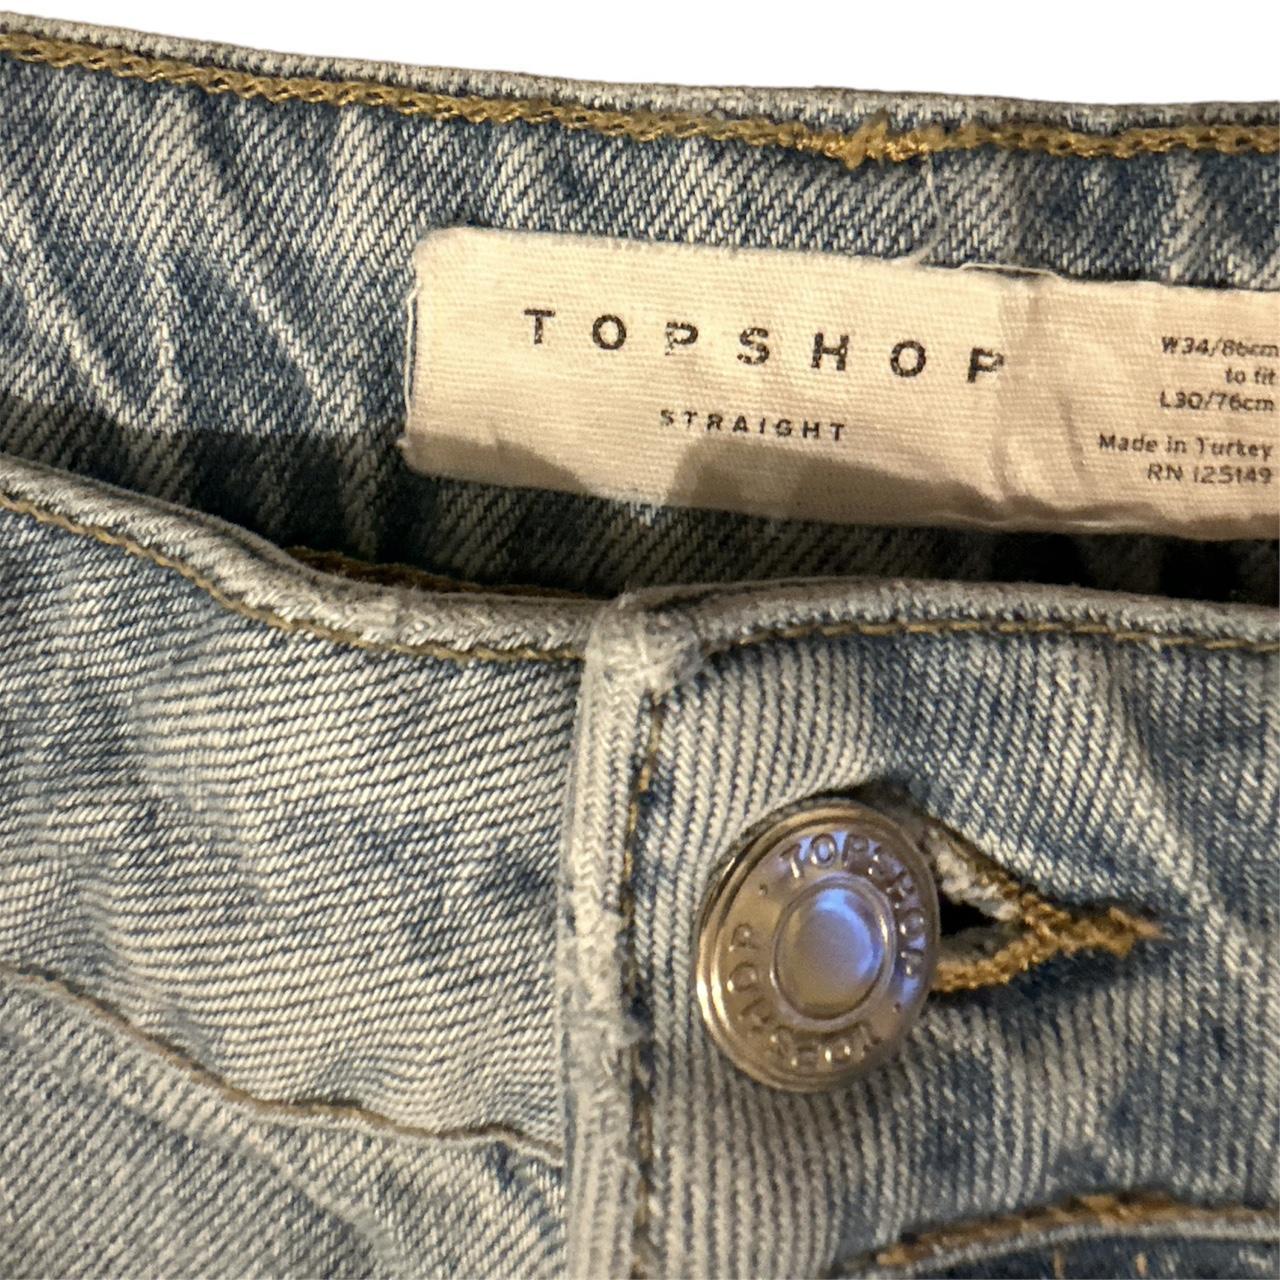 ☀️ Ripped Topshop Denim Jeans 🌻 🌞 Pair with a white... - Depop